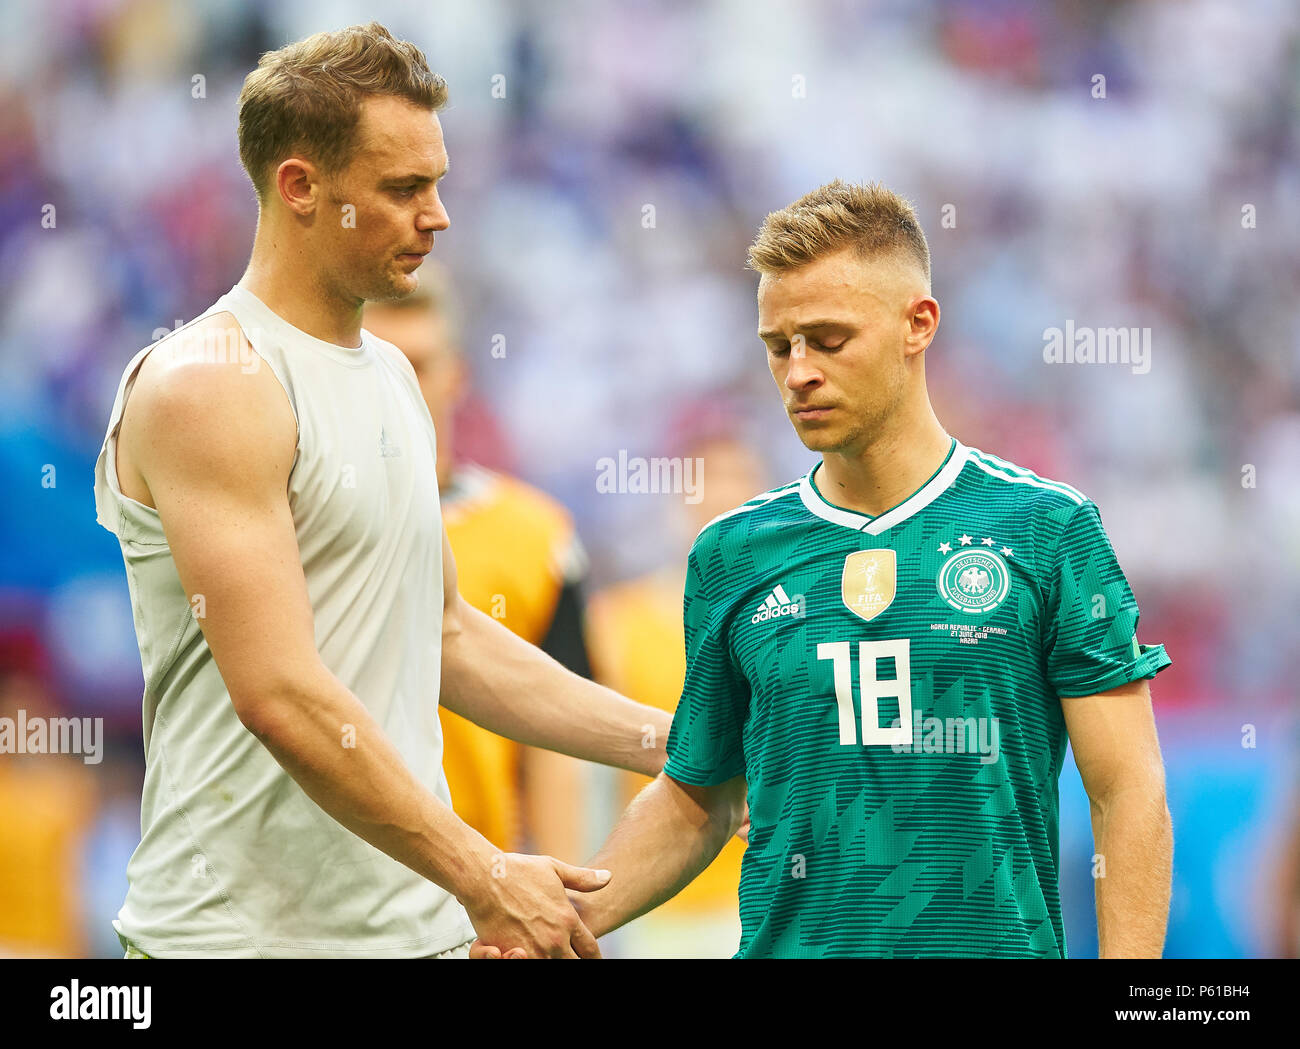 Kazan, Russia. 27th Jun, 2018. Germany - South Korea, Soccer, Kazan, June 27, 2018 Manuel NEUER, DFB 1 goalkeeper, Joshua KIMMICH, DFB 18  whine, weep, cry, tears,  sad, disappointed, angry, Emotions, disappointment, frustration, frustrated, sadness, desperate, despair,  GERMANY - KOREA REPUBLIC 0-2 FIFA WORLD CUP 2018 RUSSIA, Group F, Season 2018/2019,  June 27, 2018  Stadium K a z a n - A r e n a in Kazan, Russia. © Peter Schatz / Alamy Live News Stock Photo